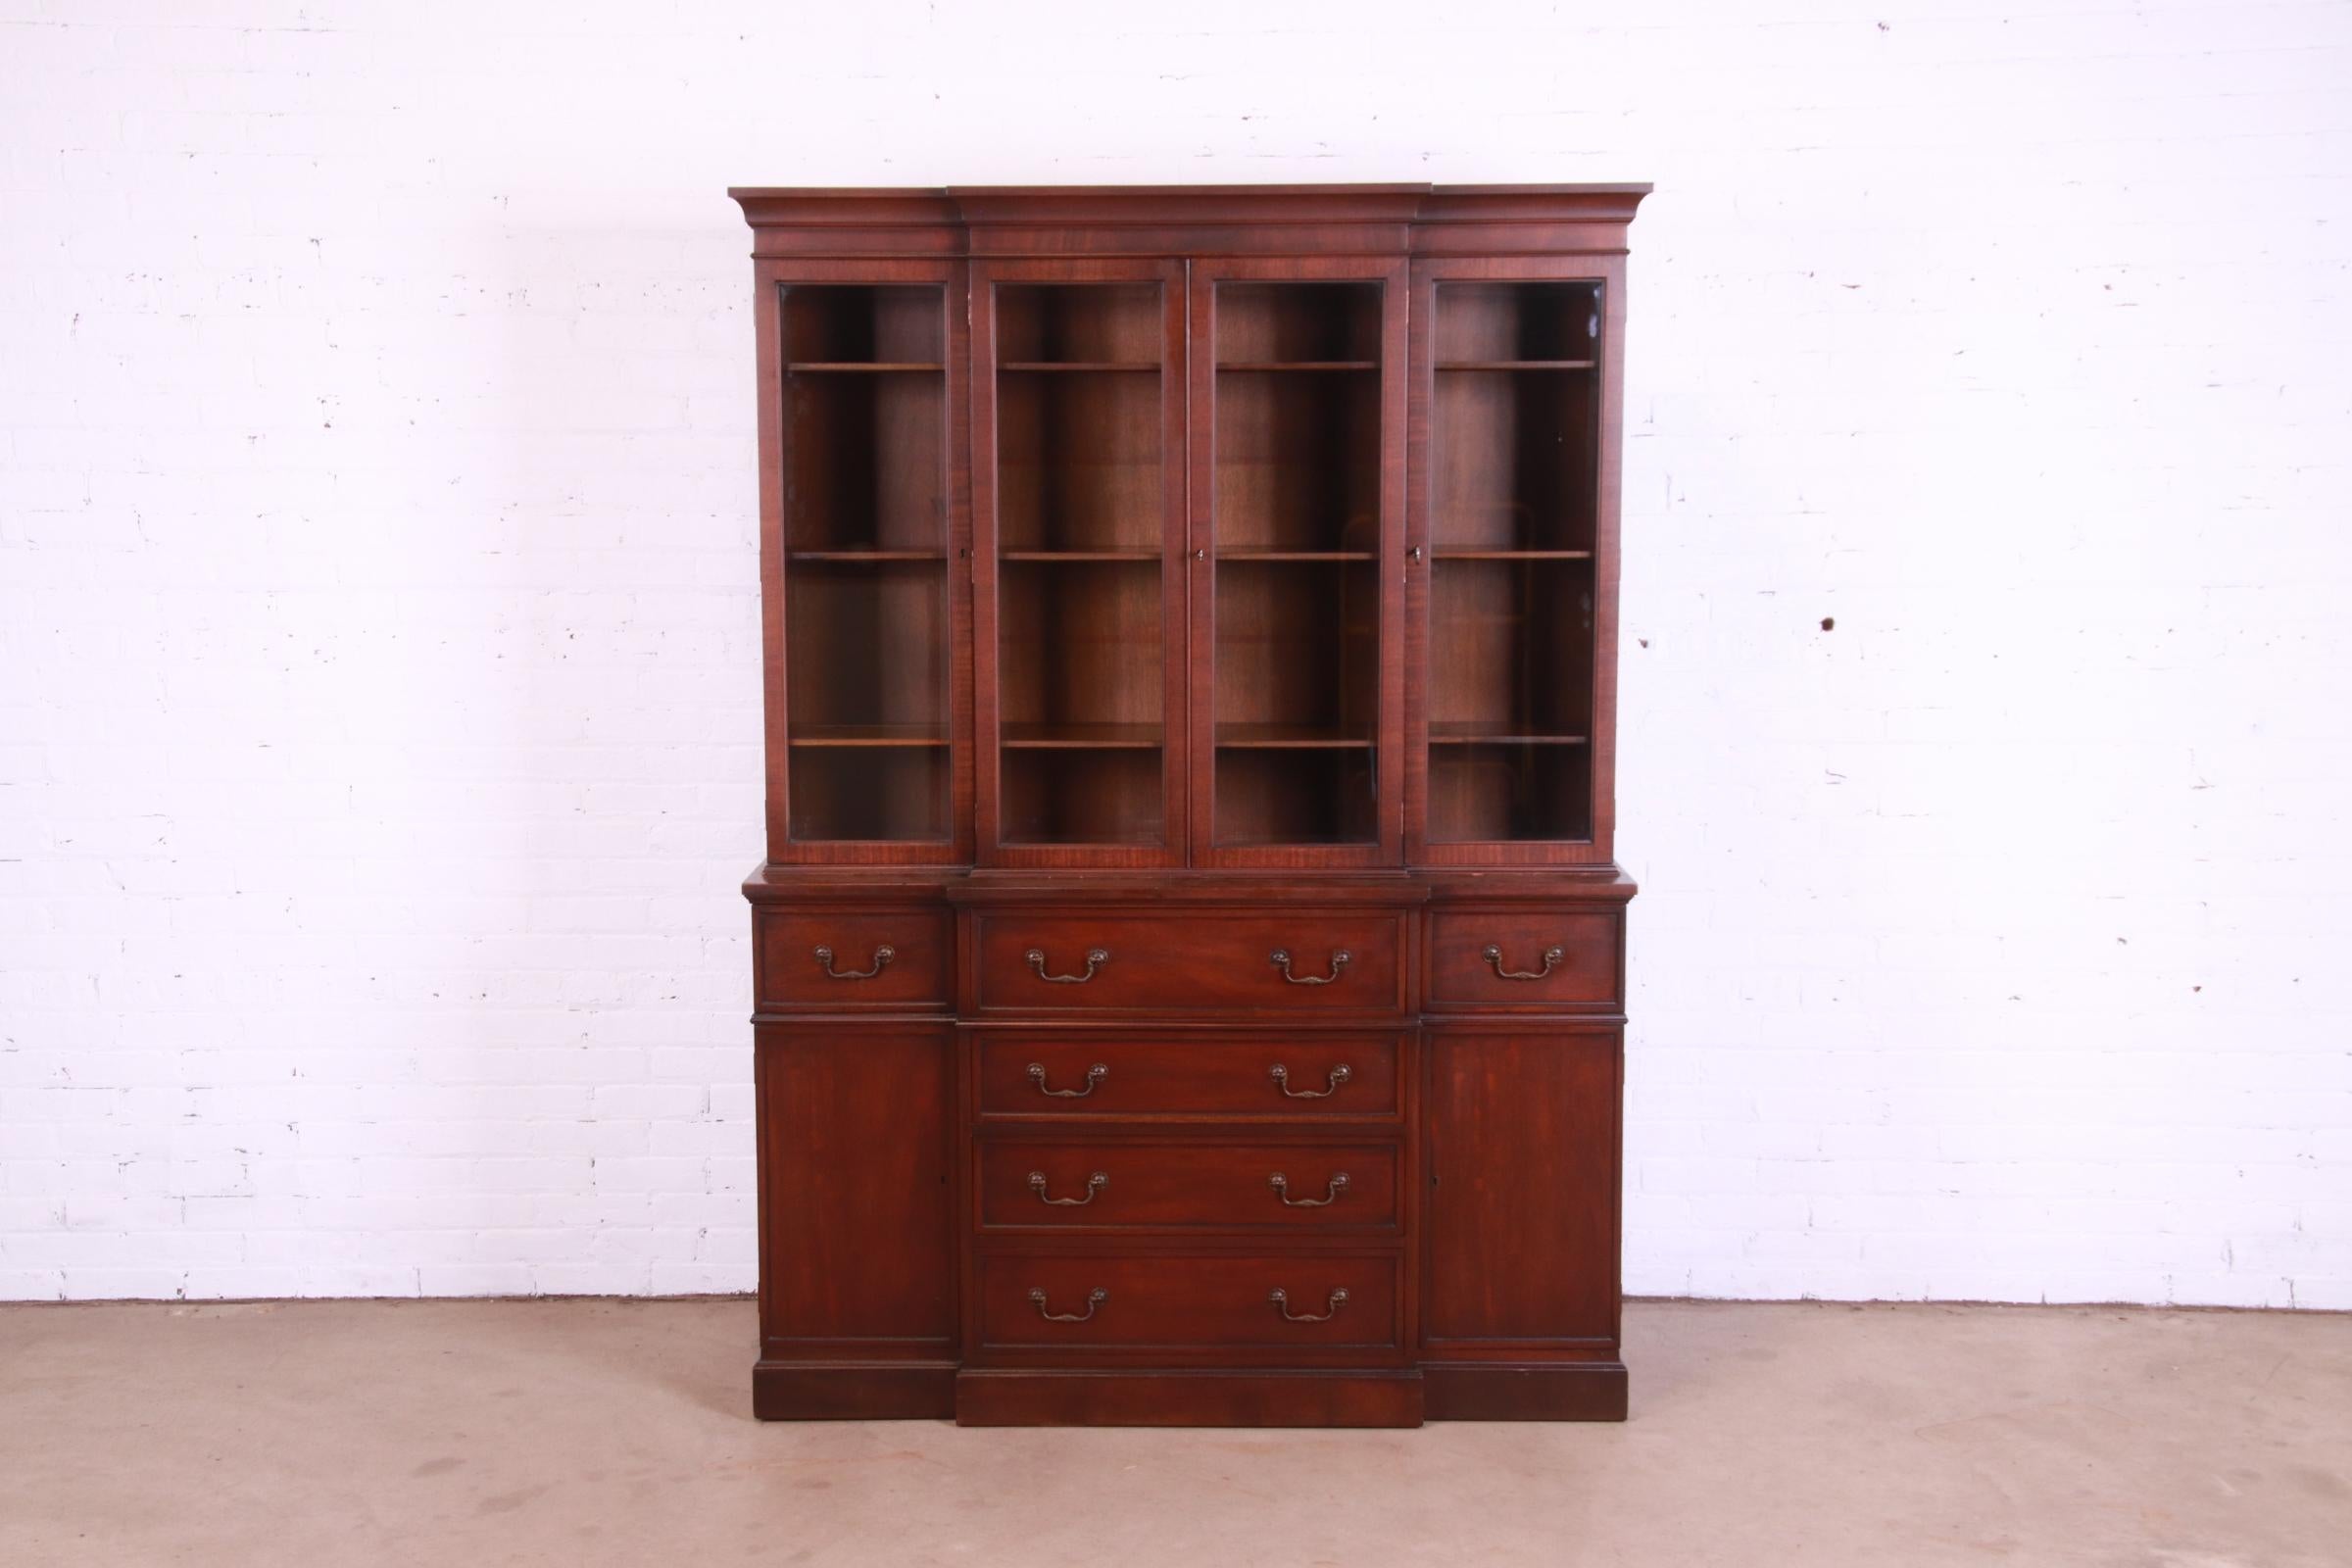 A beautiful Georgian style breakfront bookcase cabinet with secretary desk

By Heritage Henredon

USA, Circa 1960s

Mahogany, with glass front doors, original brass hardware, and embossed leather writing surface. Cabinet locks, and original